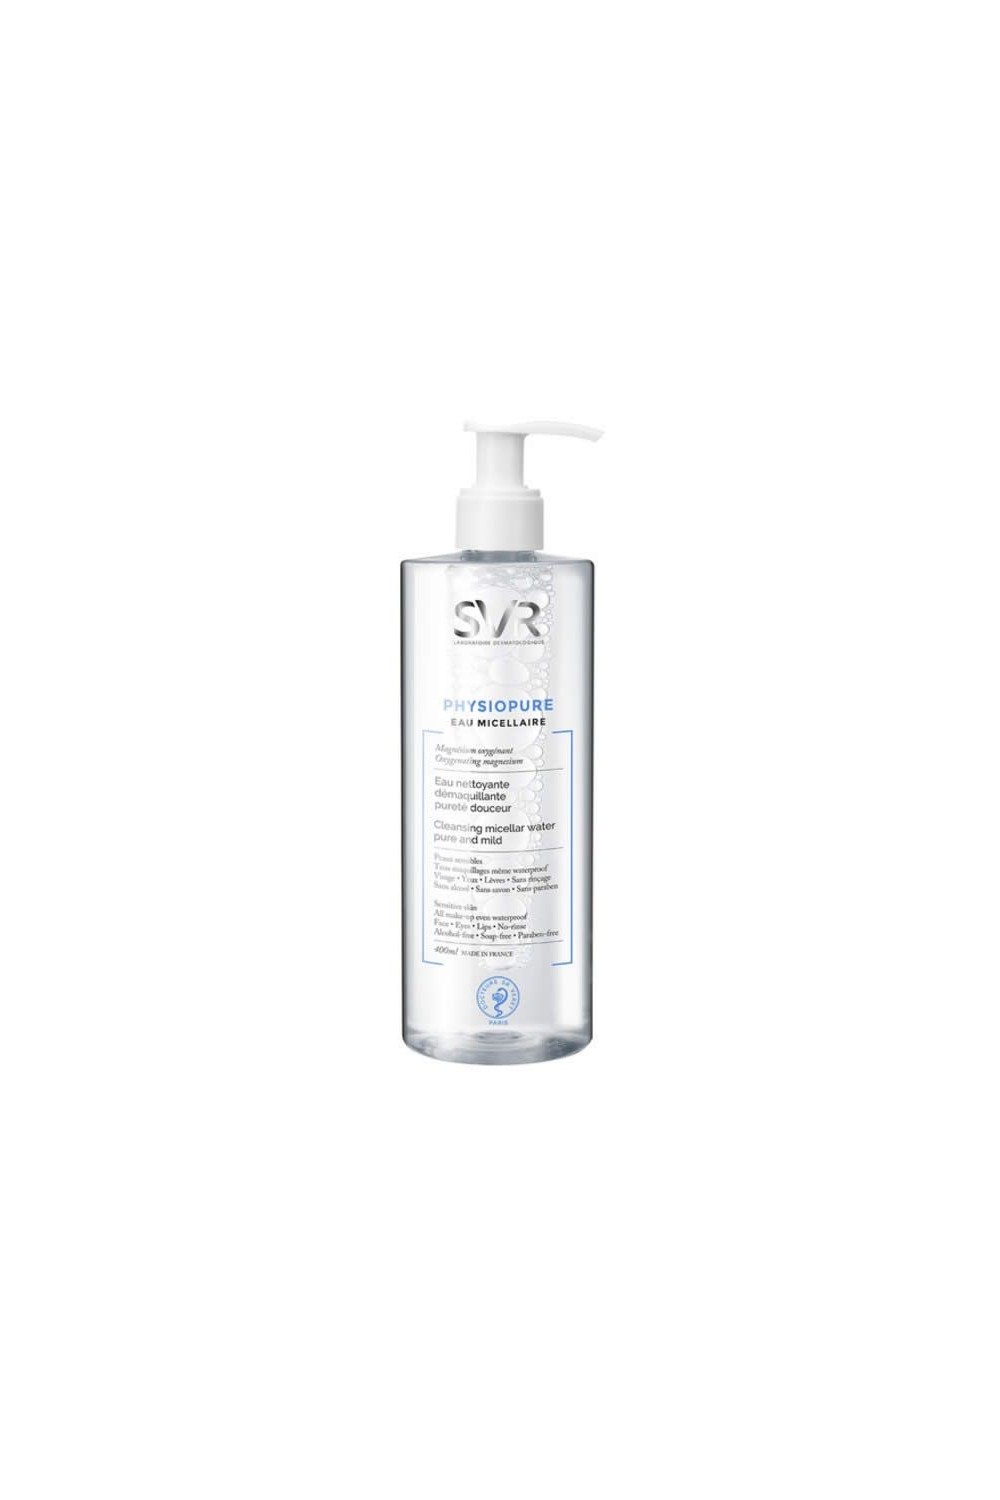 Svr Physiopure Eau Micellaire 400ml